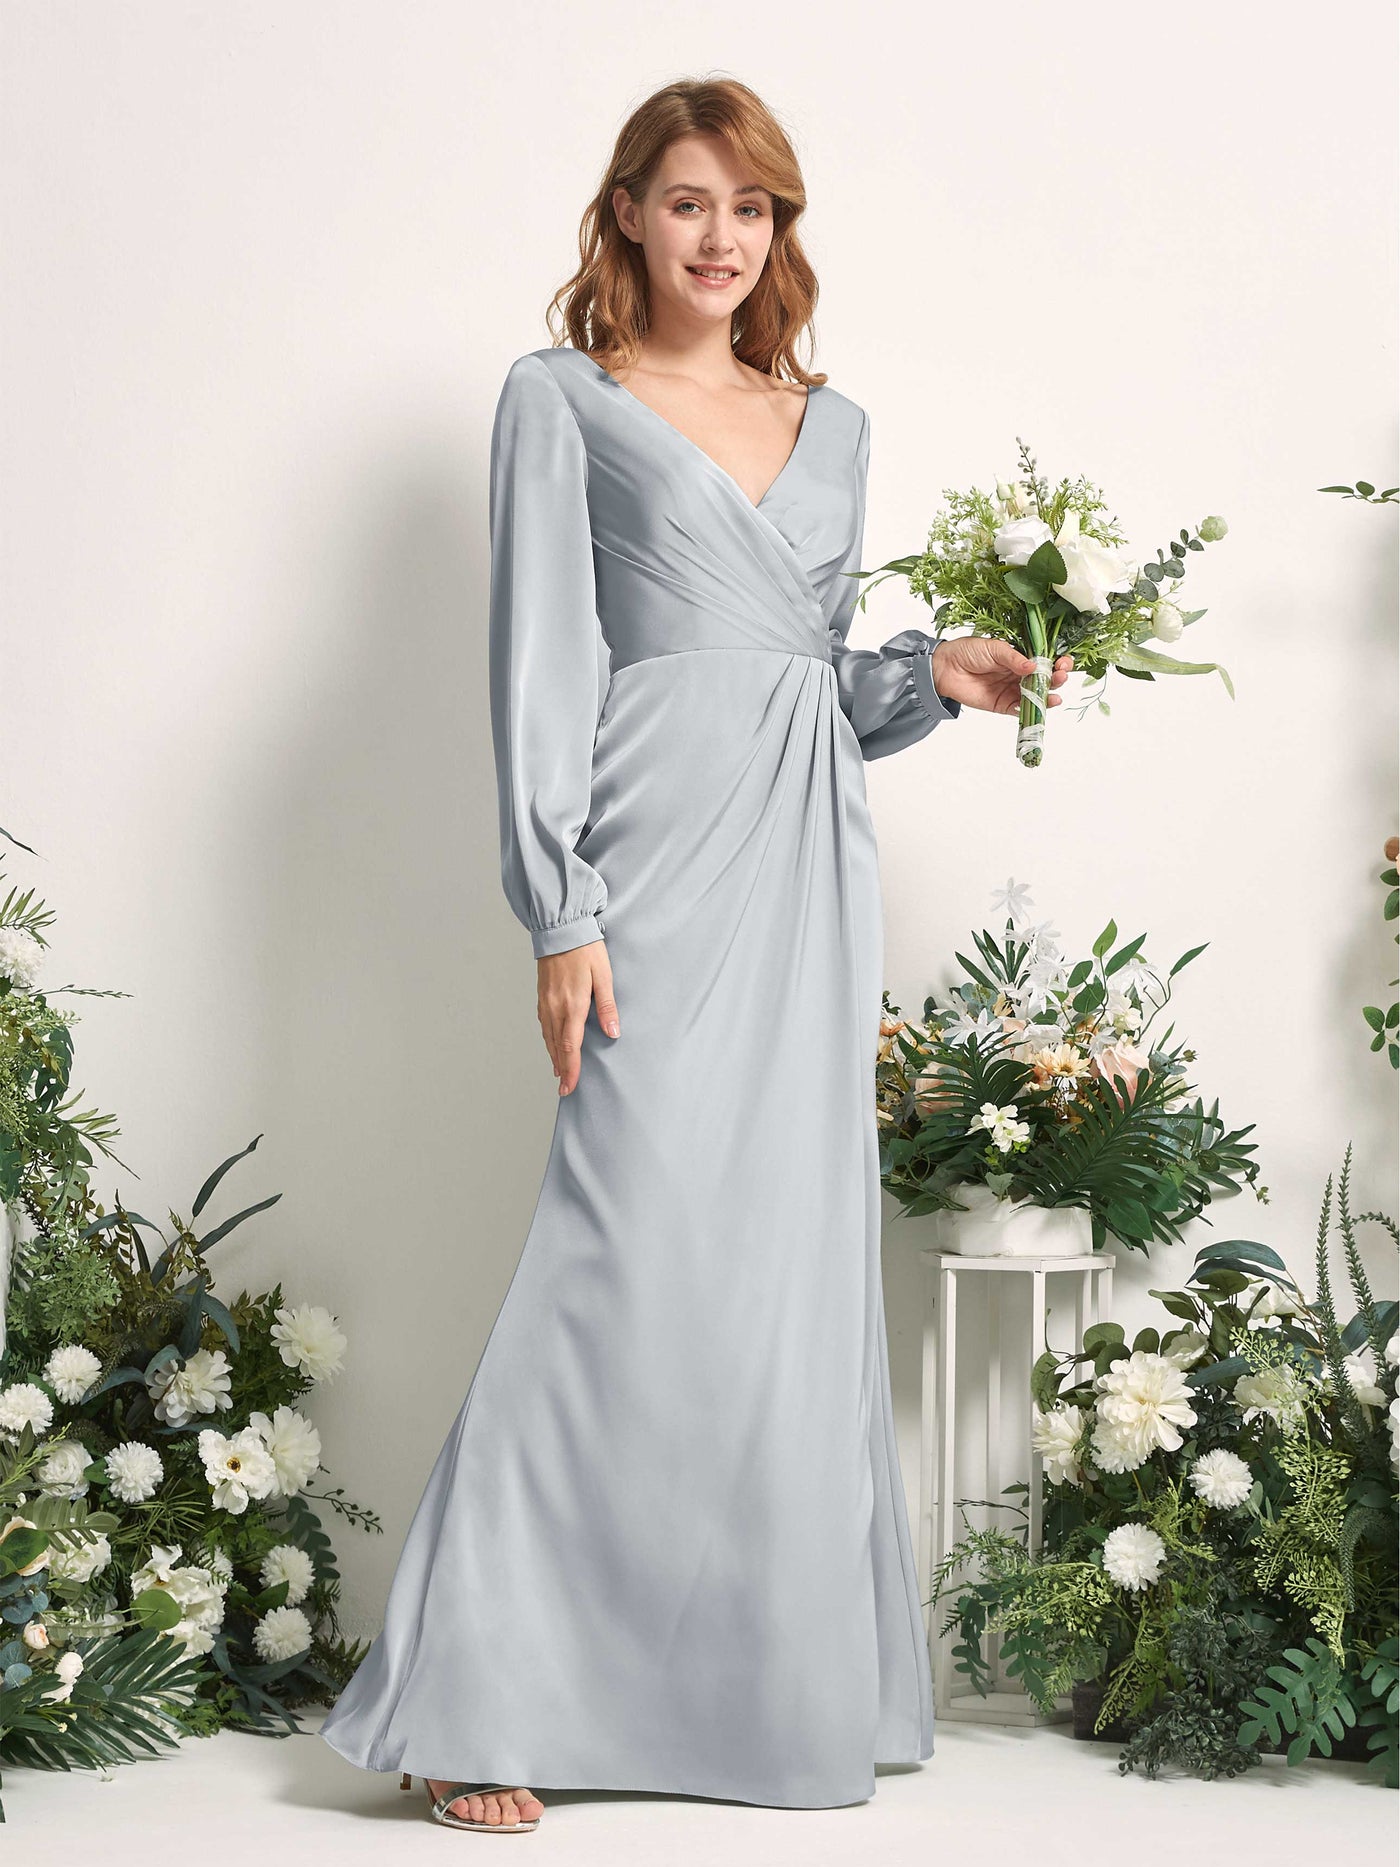 Baby Blue Bridesmaid Dresses Bridesmaid Dress Ball Gown Satin V-neck Full Length Long Sleeves Wedding Party Dress (80225101)#color_baby-blue